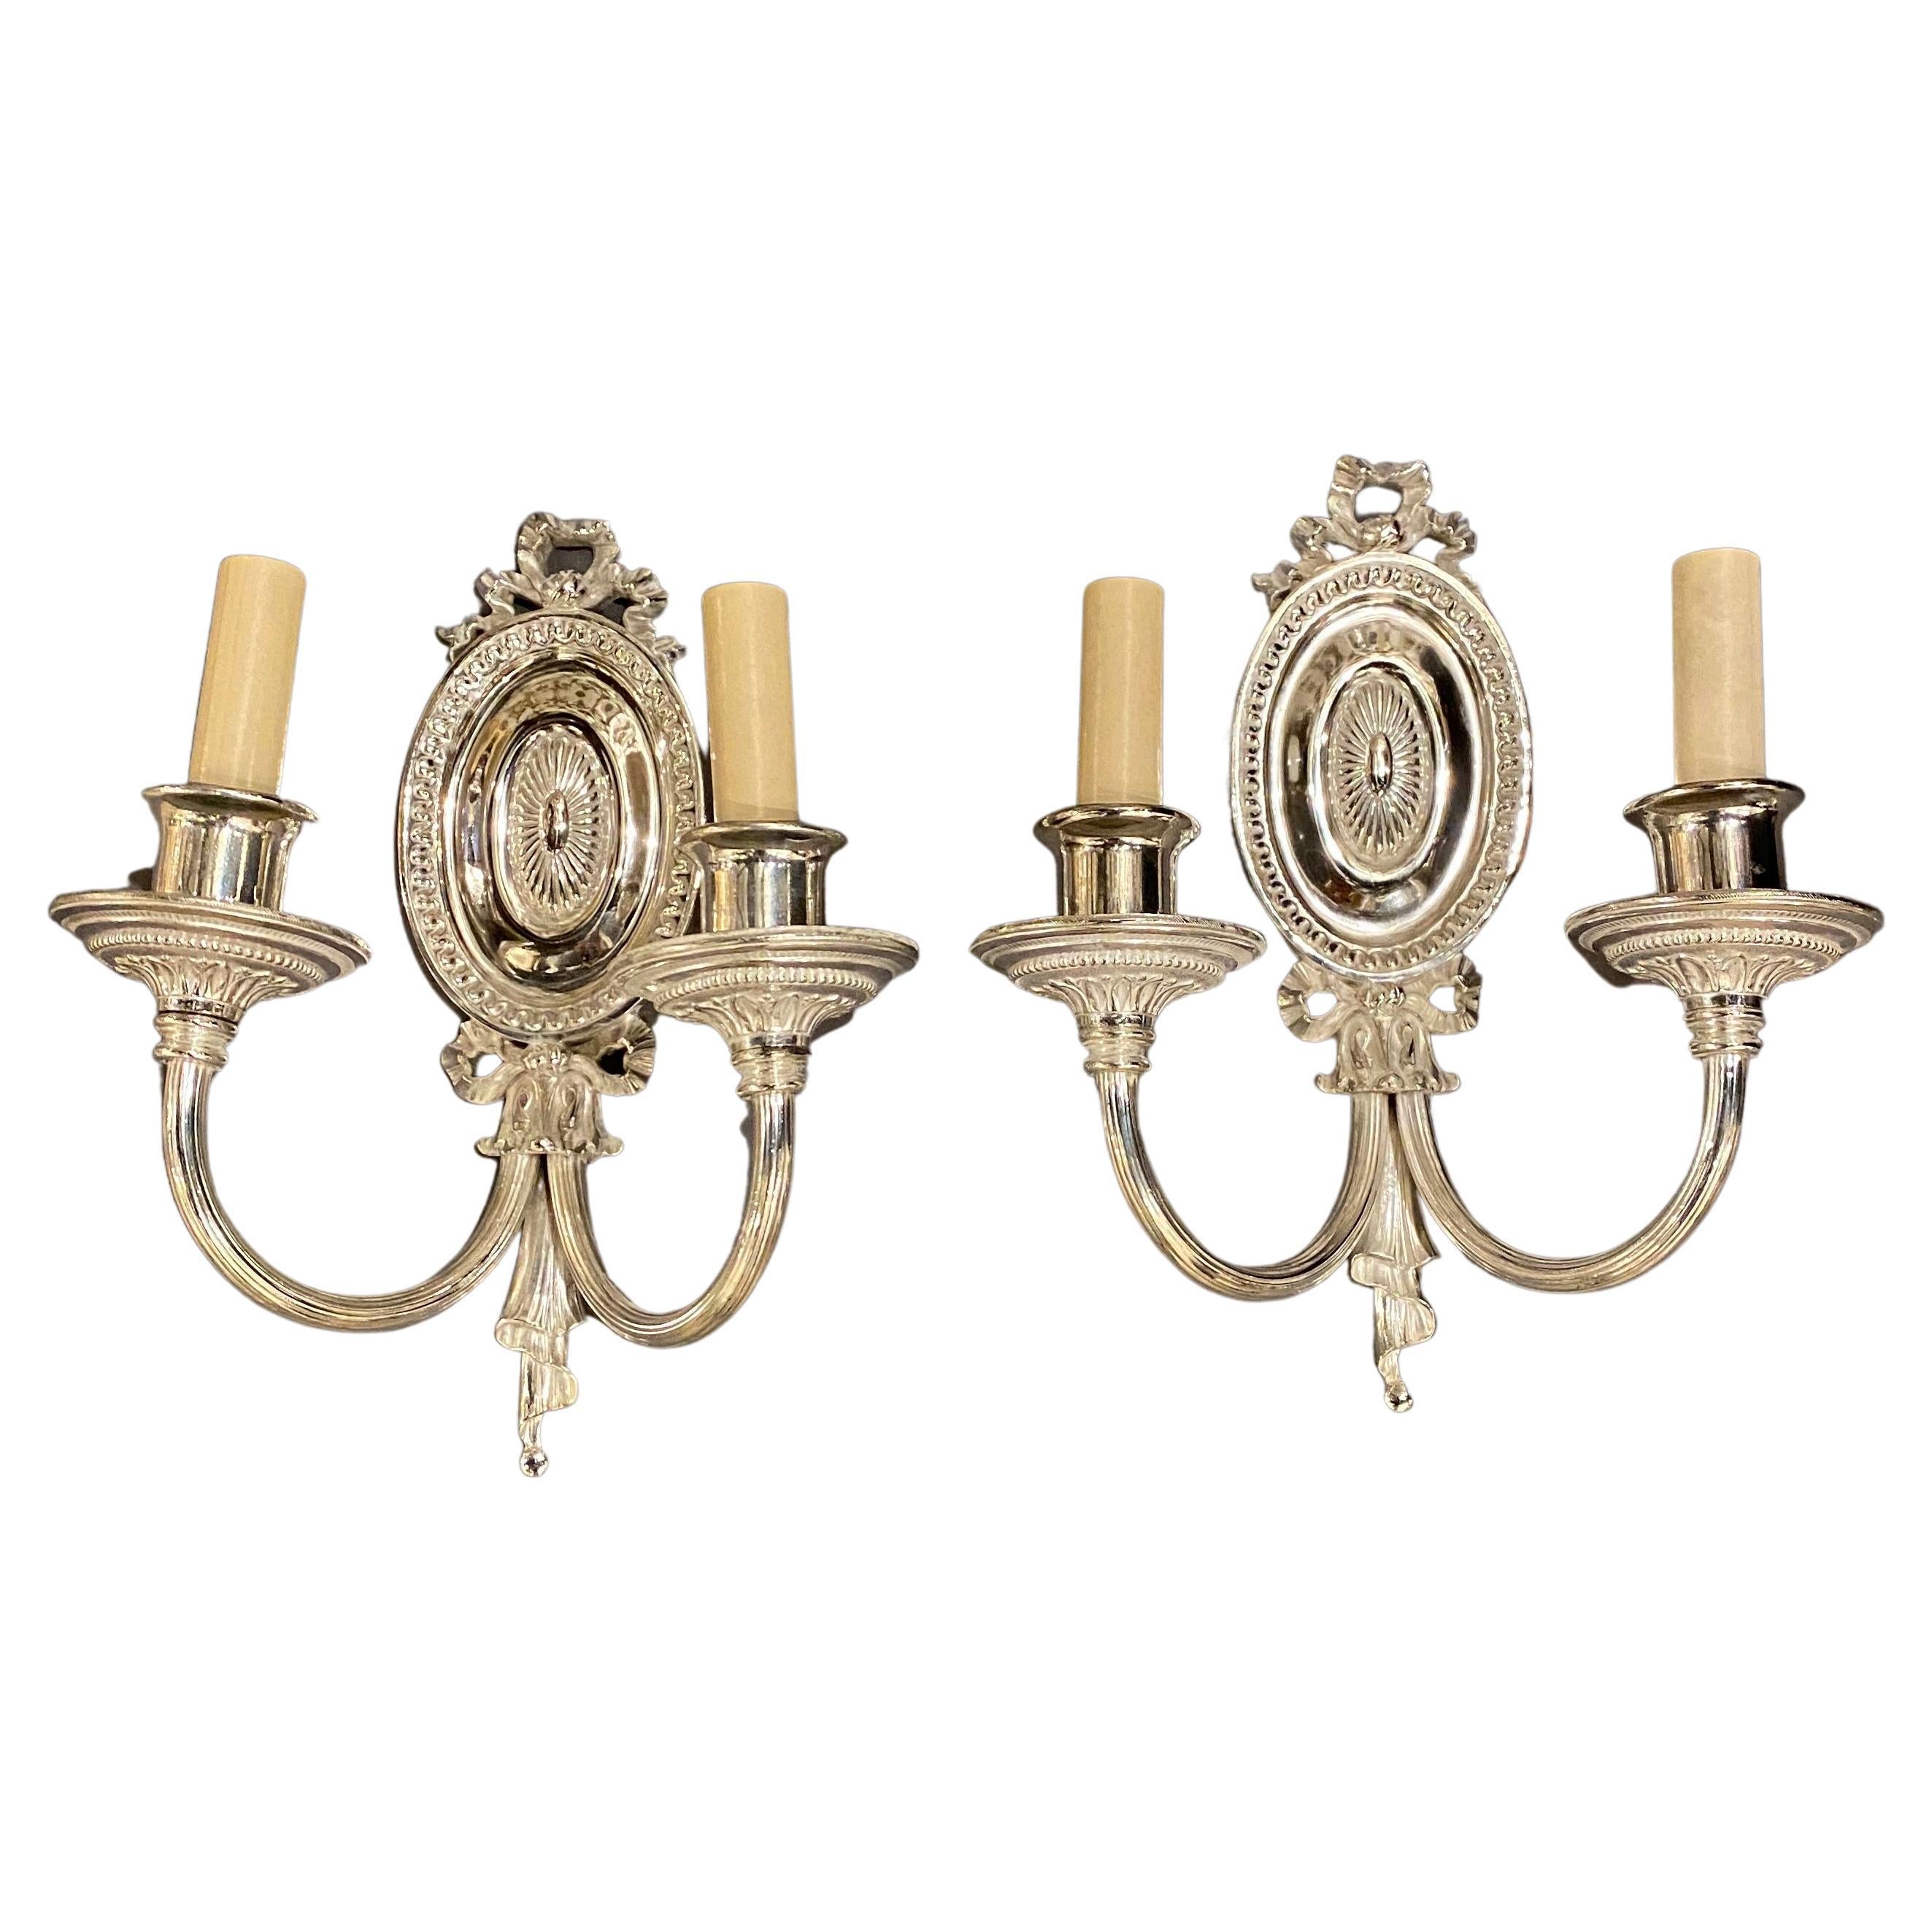 1920s Silver Plated Caldwell Sconces